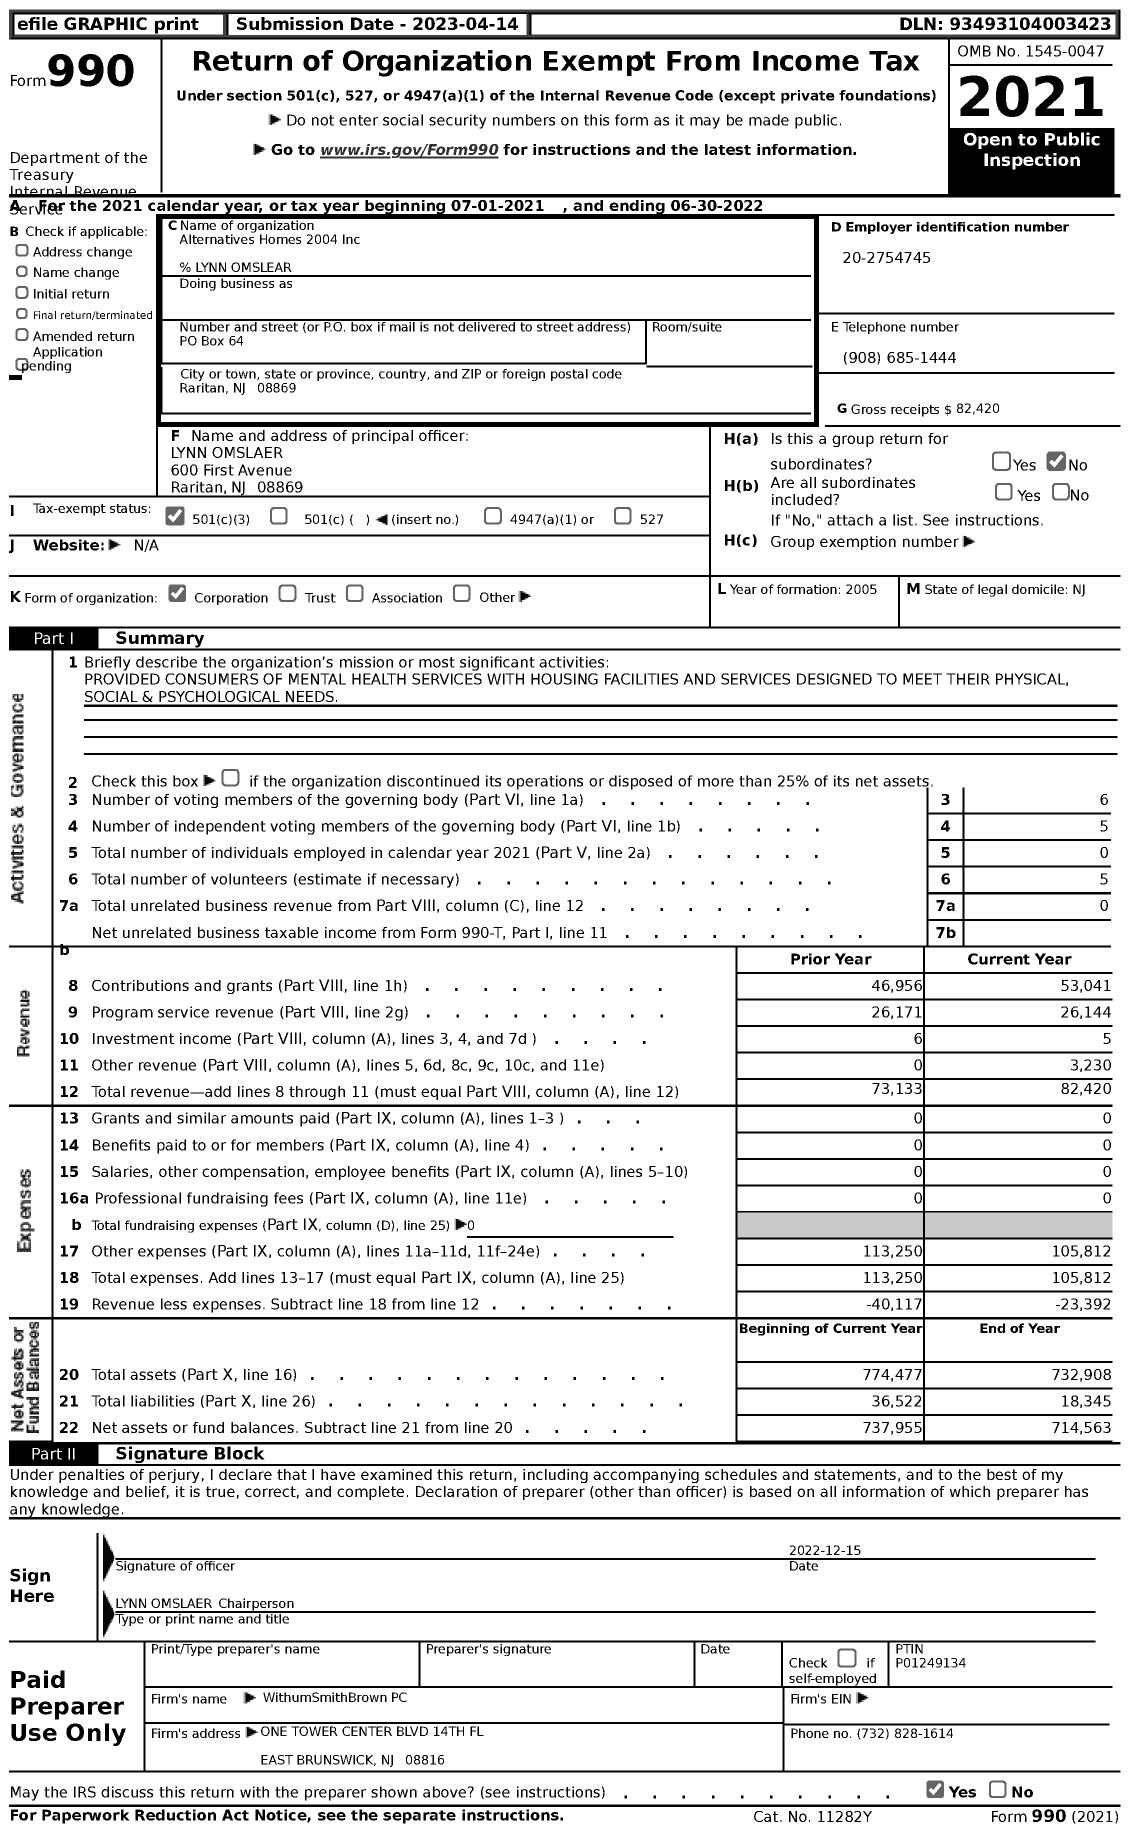 Image of first page of 2021 Form 990 for Alternatives Homes 2004